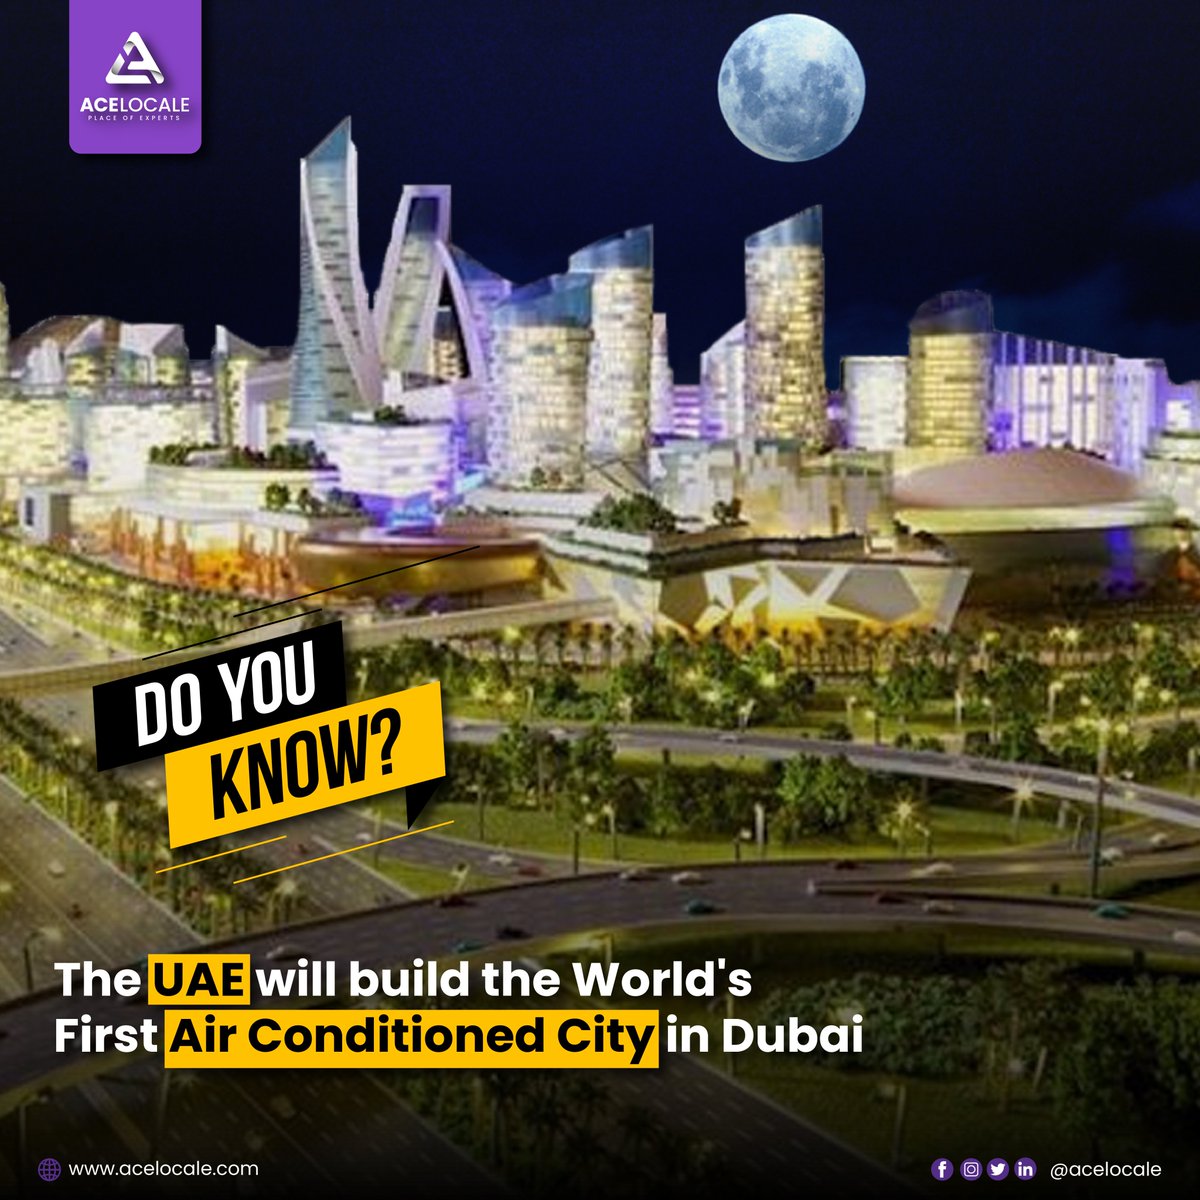 𝐋𝐞𝐭'𝐬 𝐠𝐞𝐭 𝐫𝐞𝐚𝐝𝐲 𝐟𝐨𝐫 𝐭𝐡𝐞 𝐟𝐮𝐭𝐮𝐫𝐞 🤩

The UAE is stepping into a new era by building the world's first air-conditioned city in Dubai! 🌃 

#UAE #Dubai #AirConditionedCity #ProjectSolution #StressFree #StressFreeStudying #acelocale #homeworkhelp #tuesdayvibe